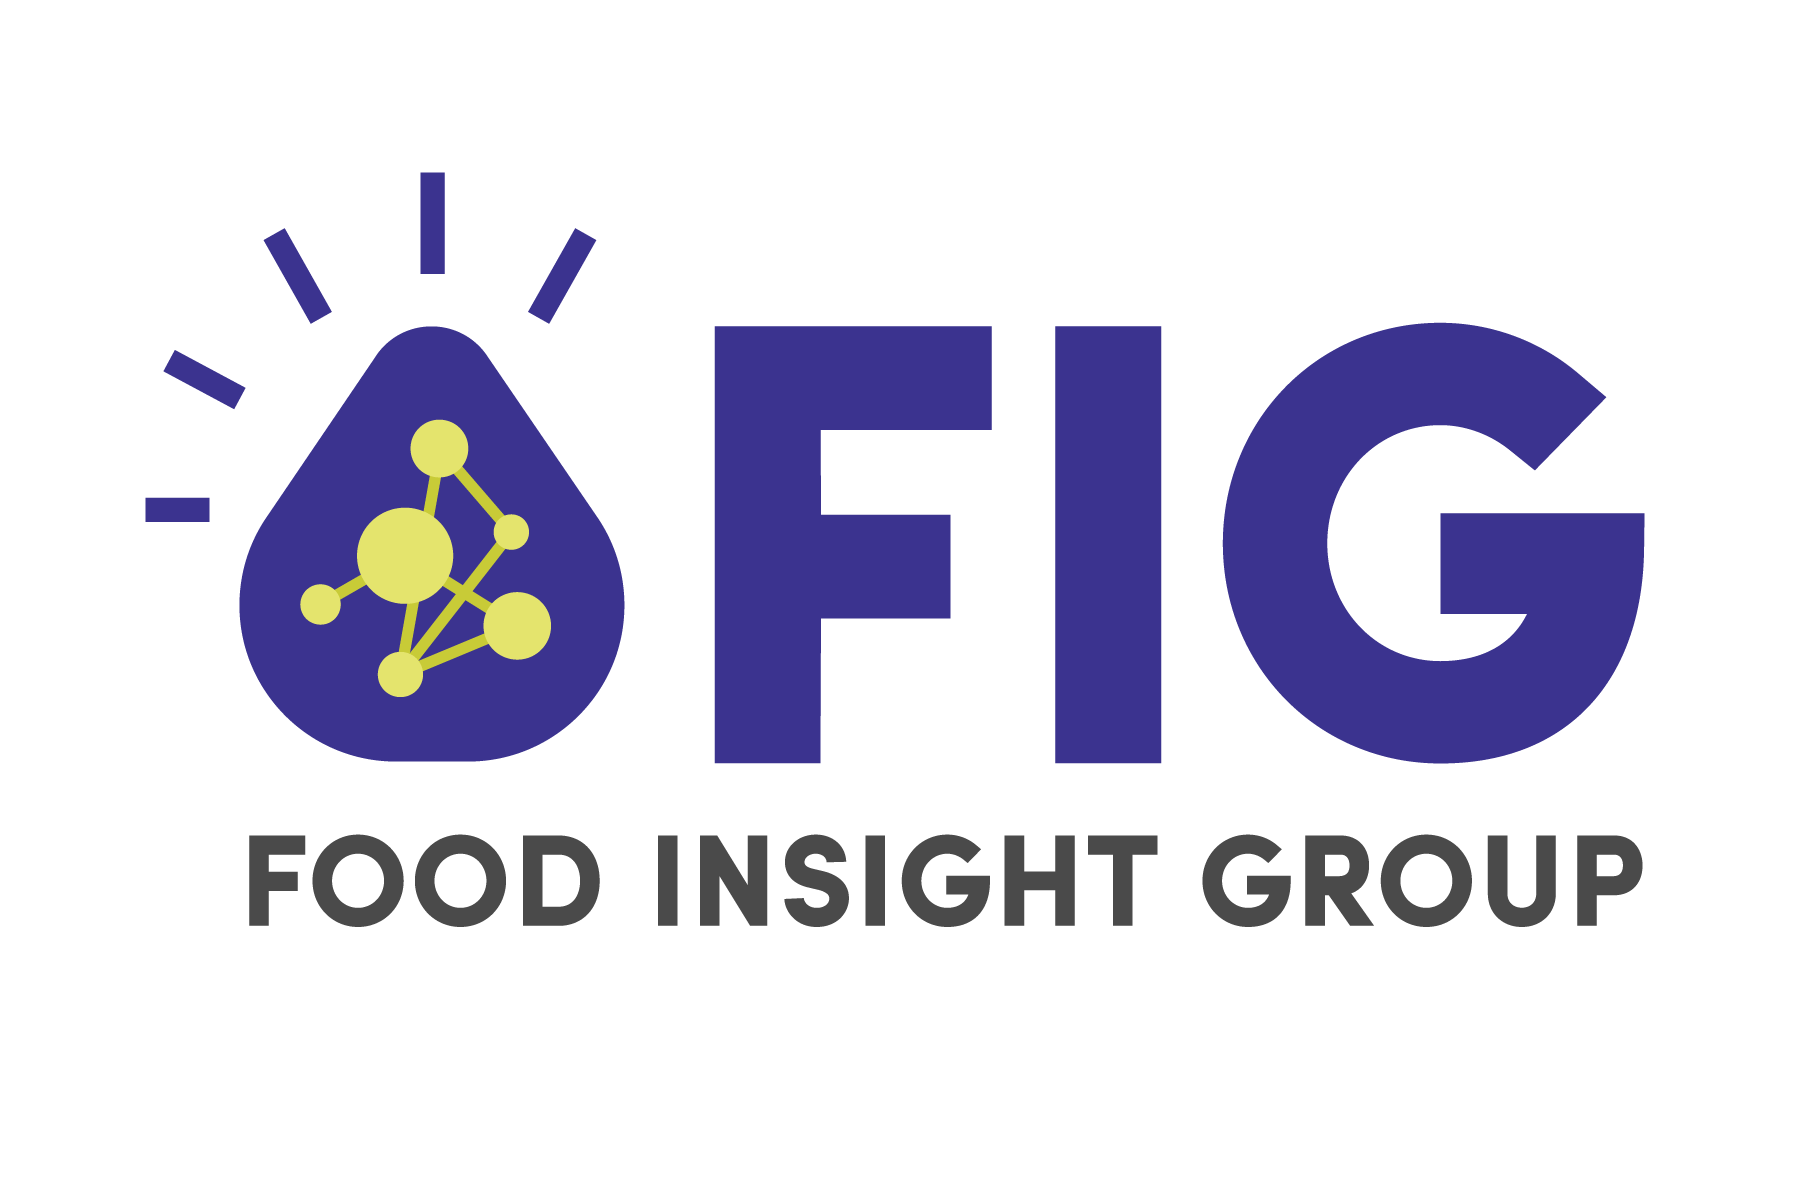 Food Insight Group